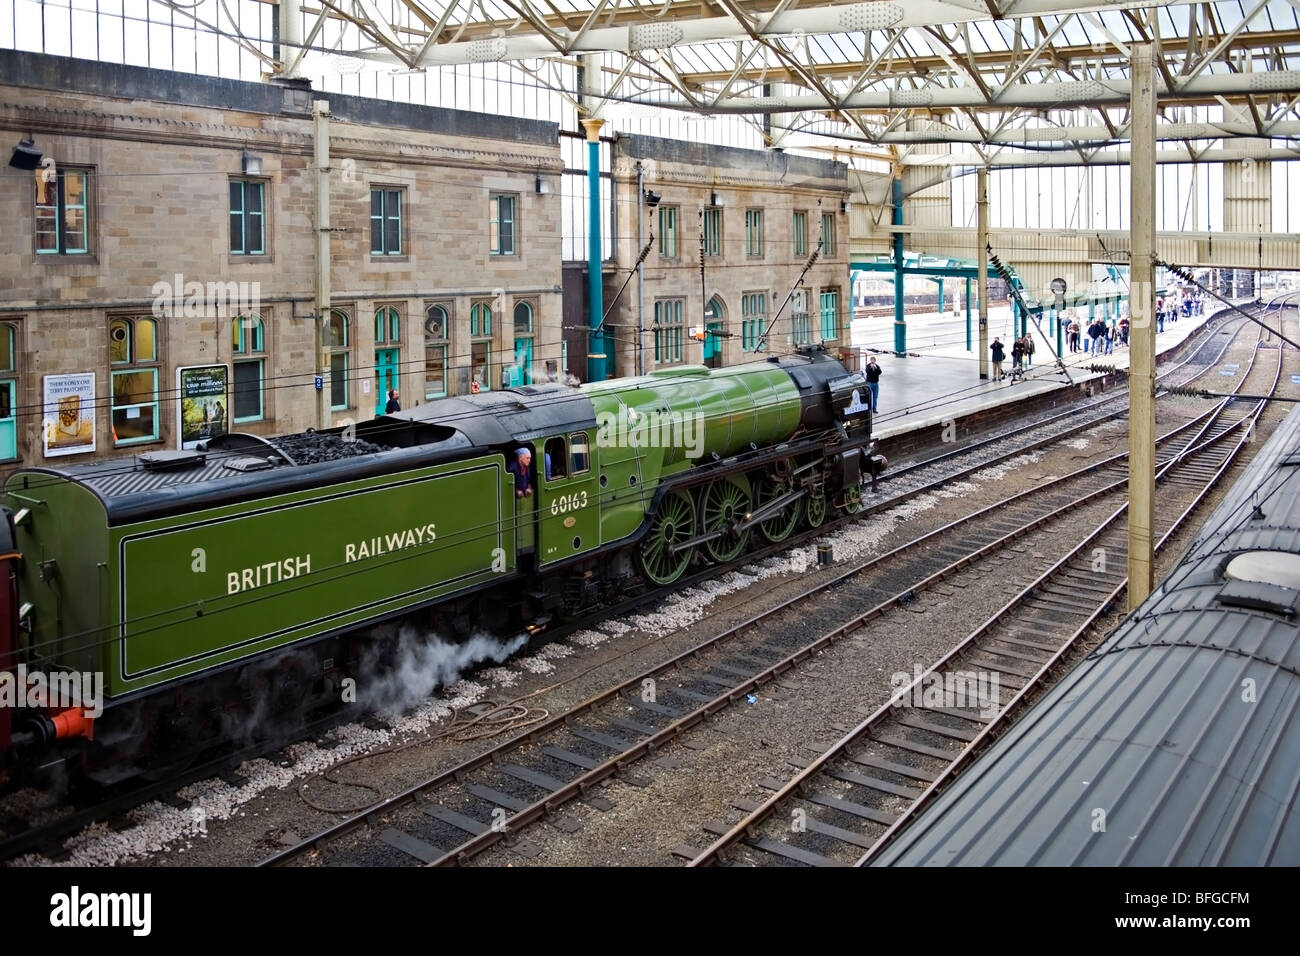 New steam locomotive 60163 'Tornado' at  Carlisle Railway Station with a special charter train. Stock Photo